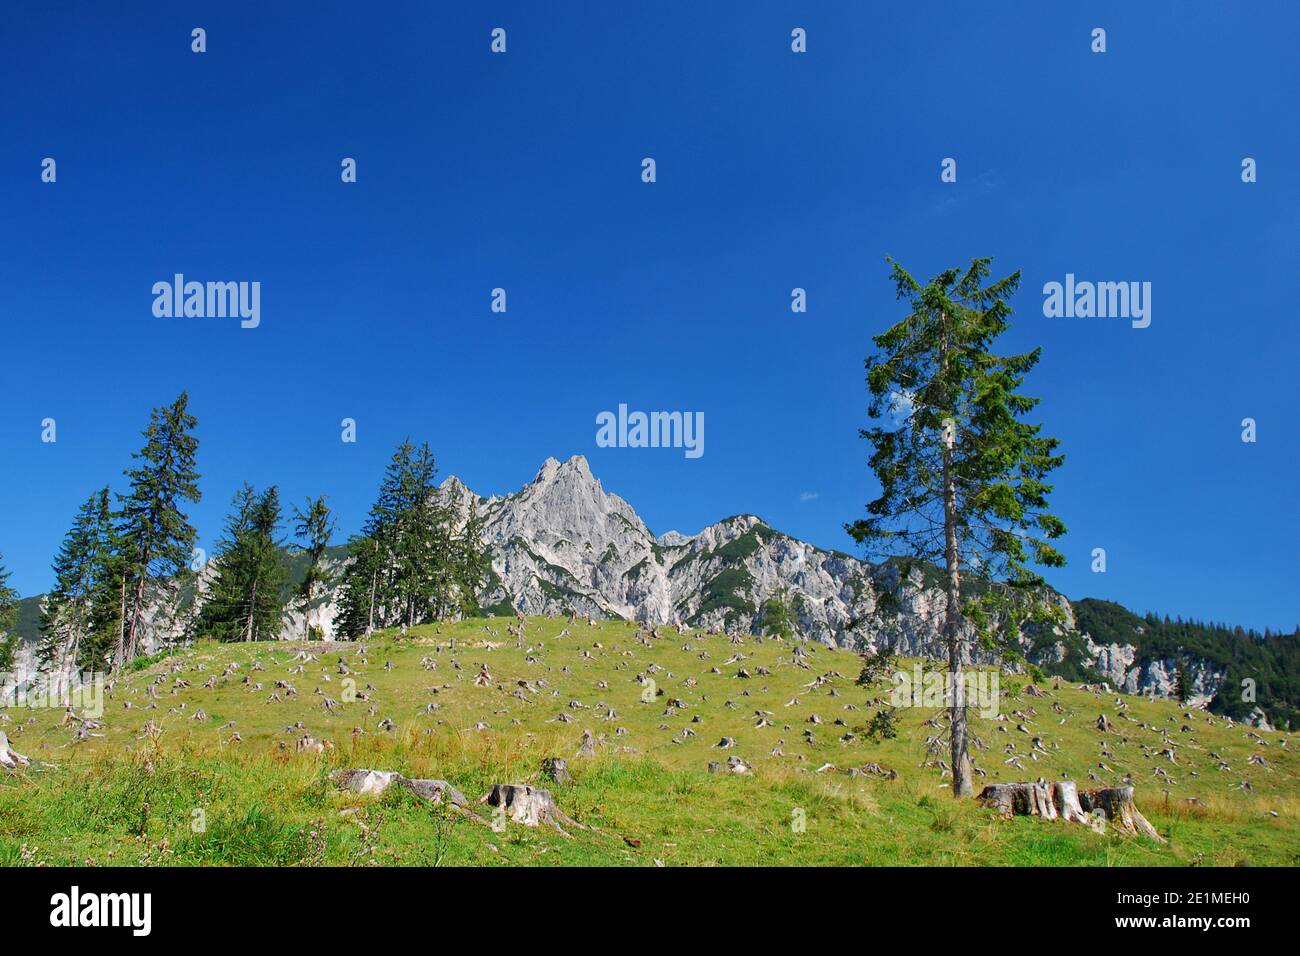 mountain landscape with trees and tree stump Stock Photo